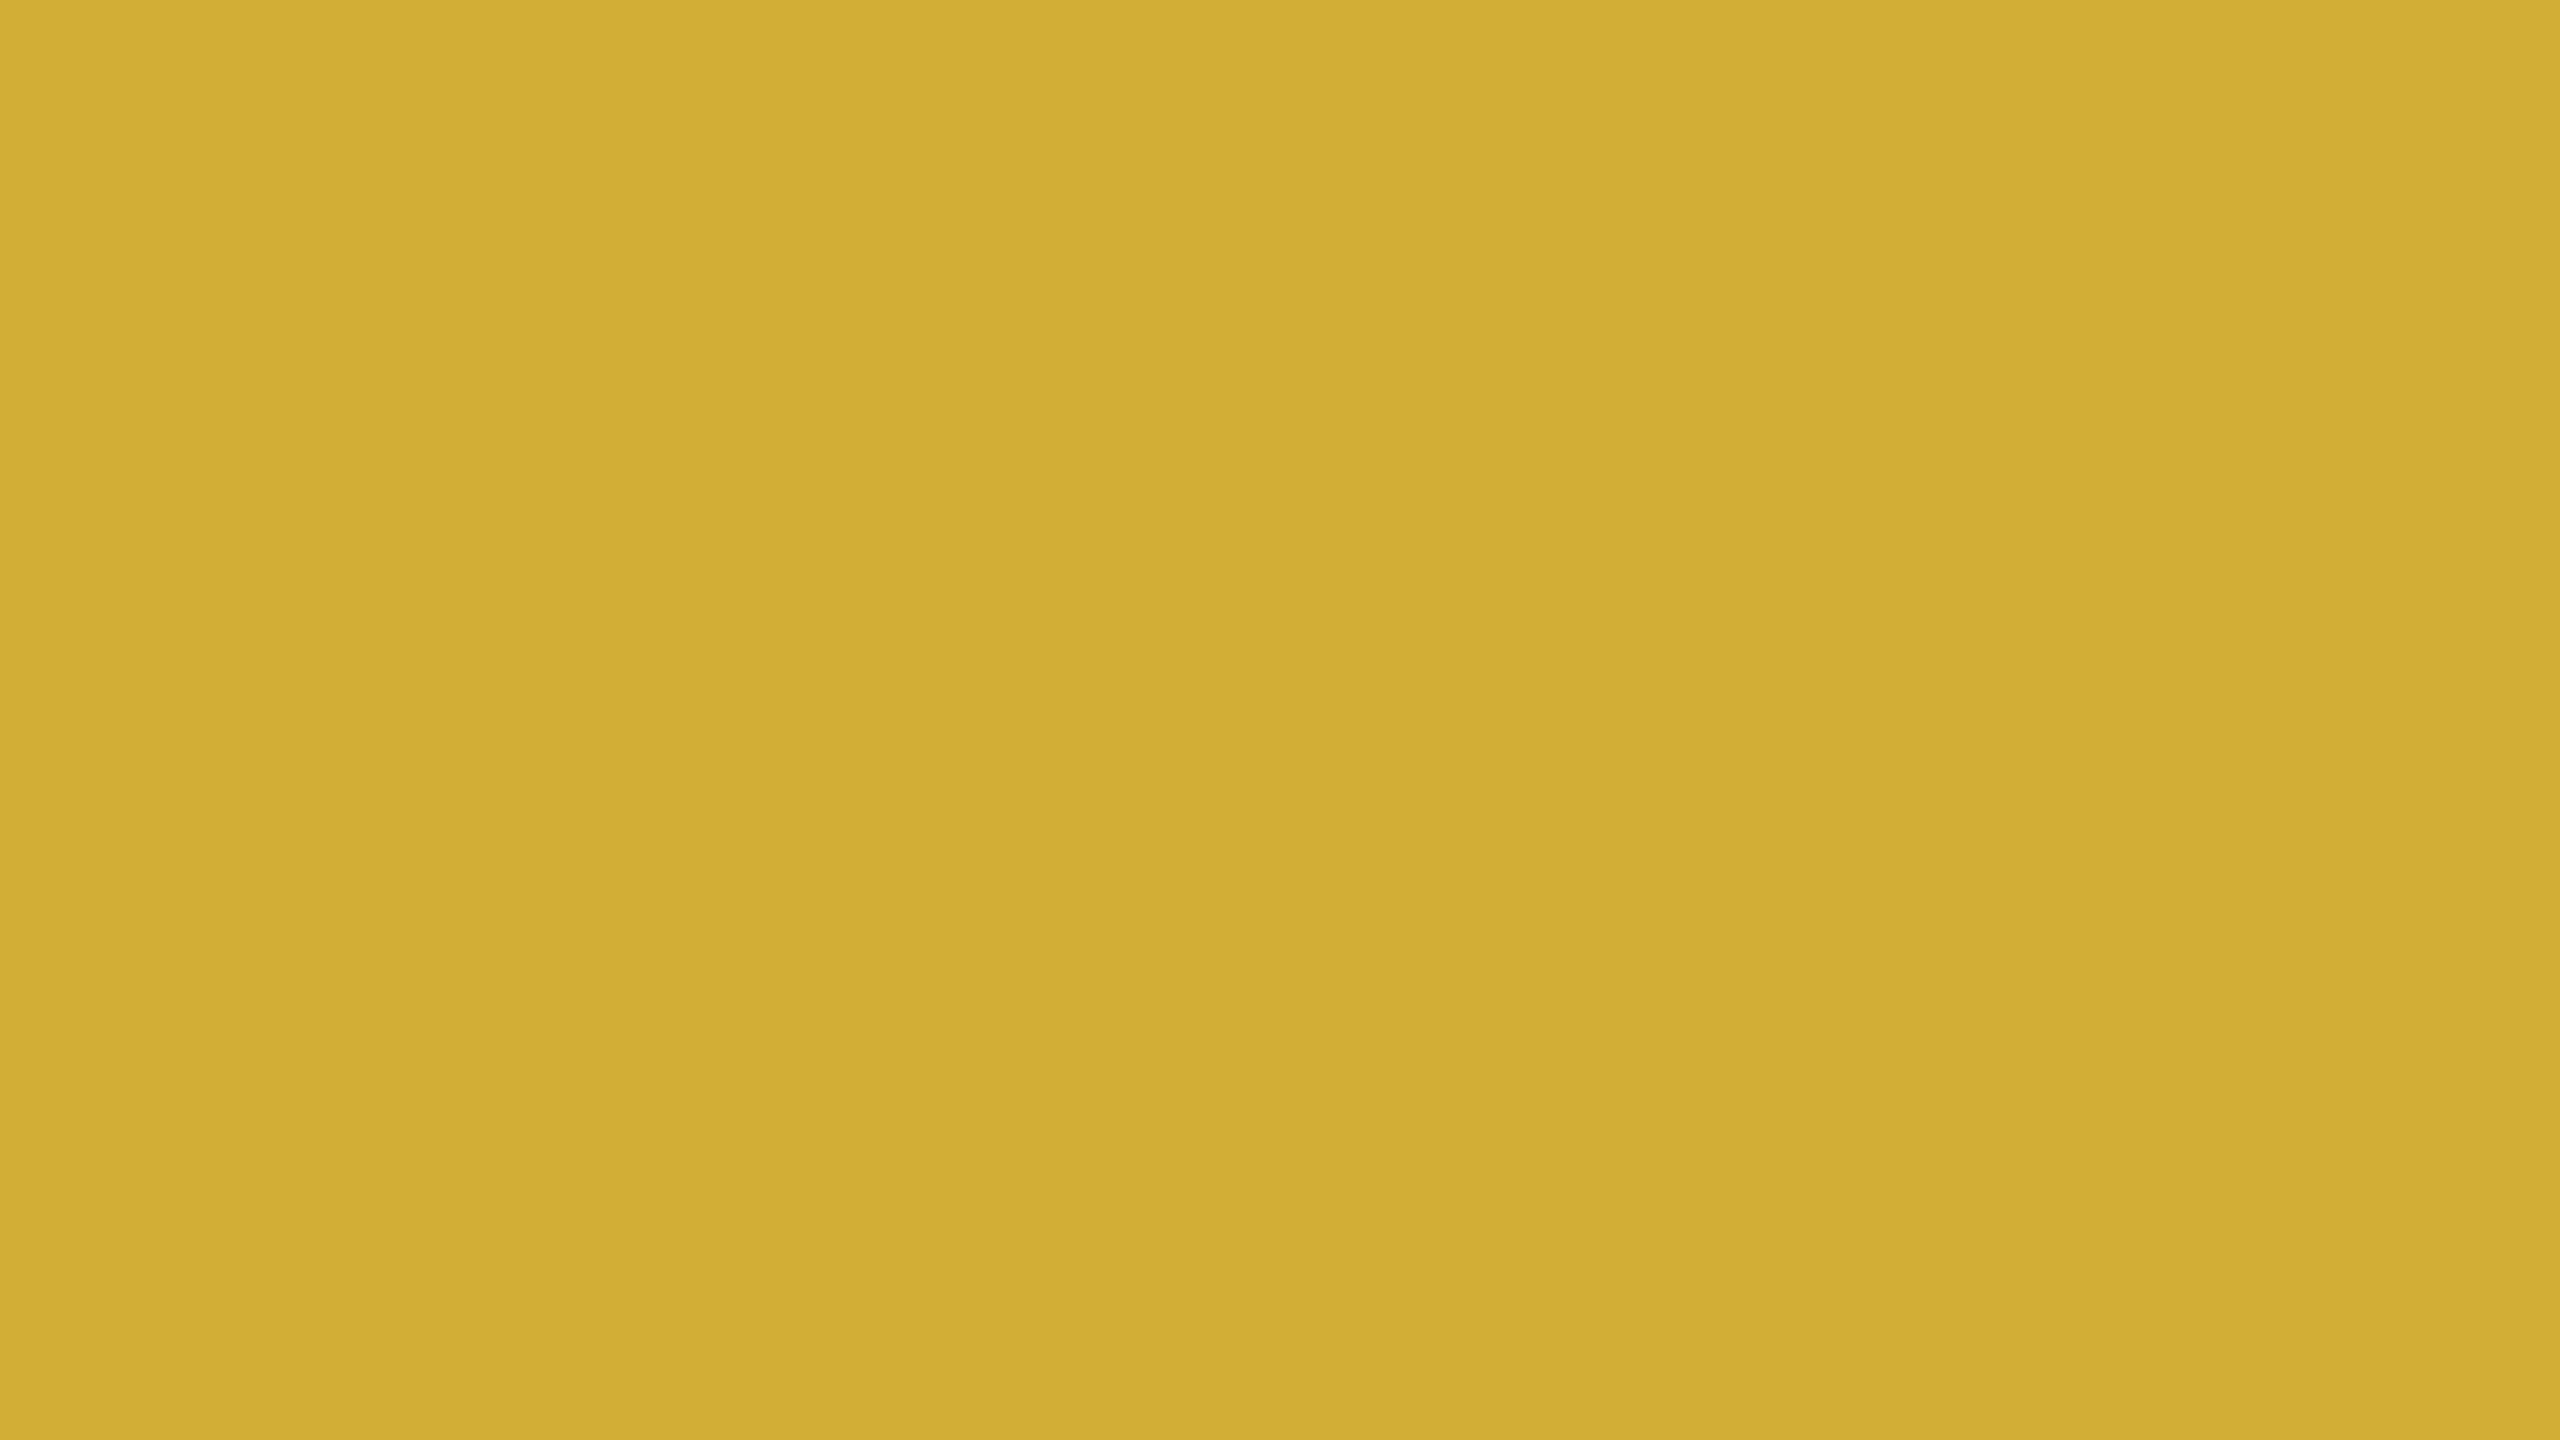 2560x1440 Yellow solid color wallpaper hd wallpapers.